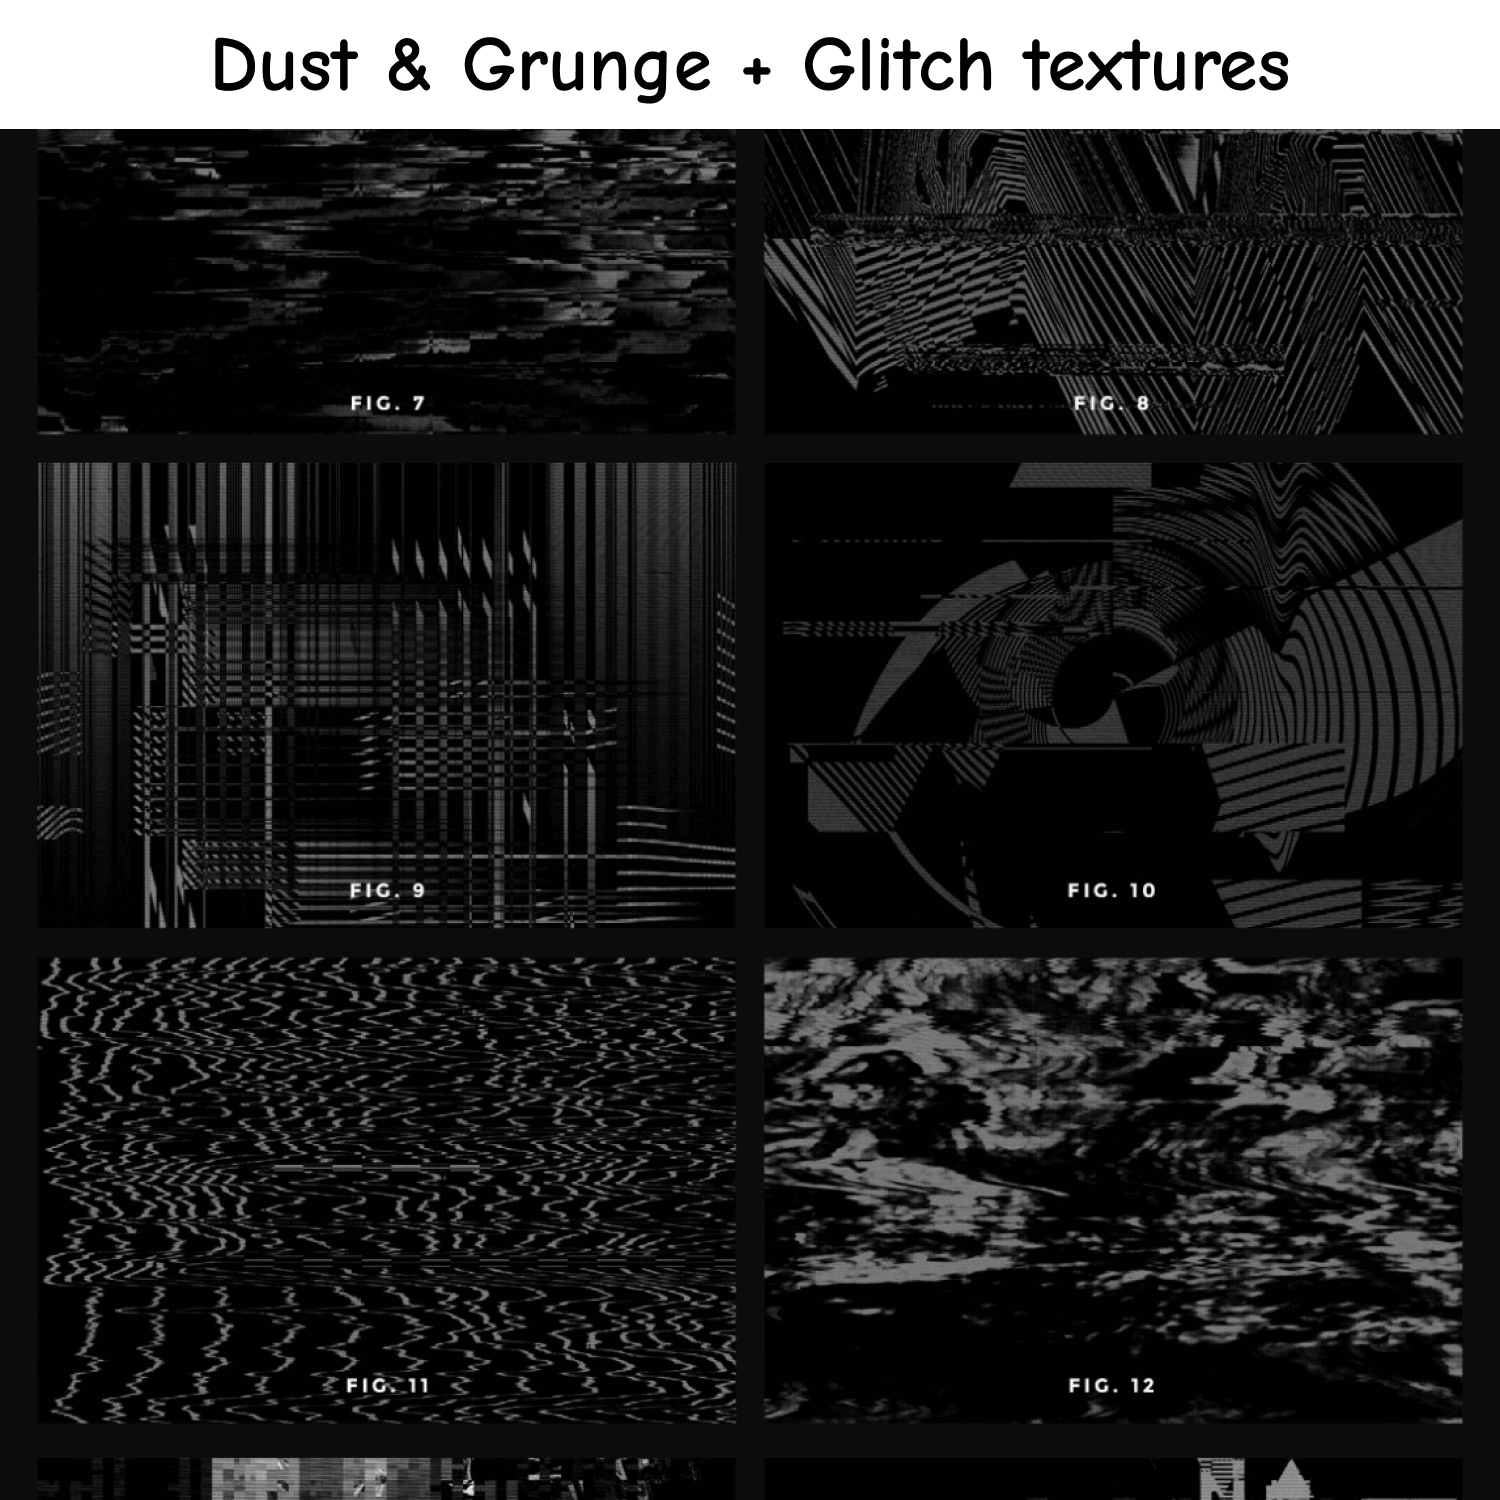 Dust and Grunge Plus Glitch Textures.